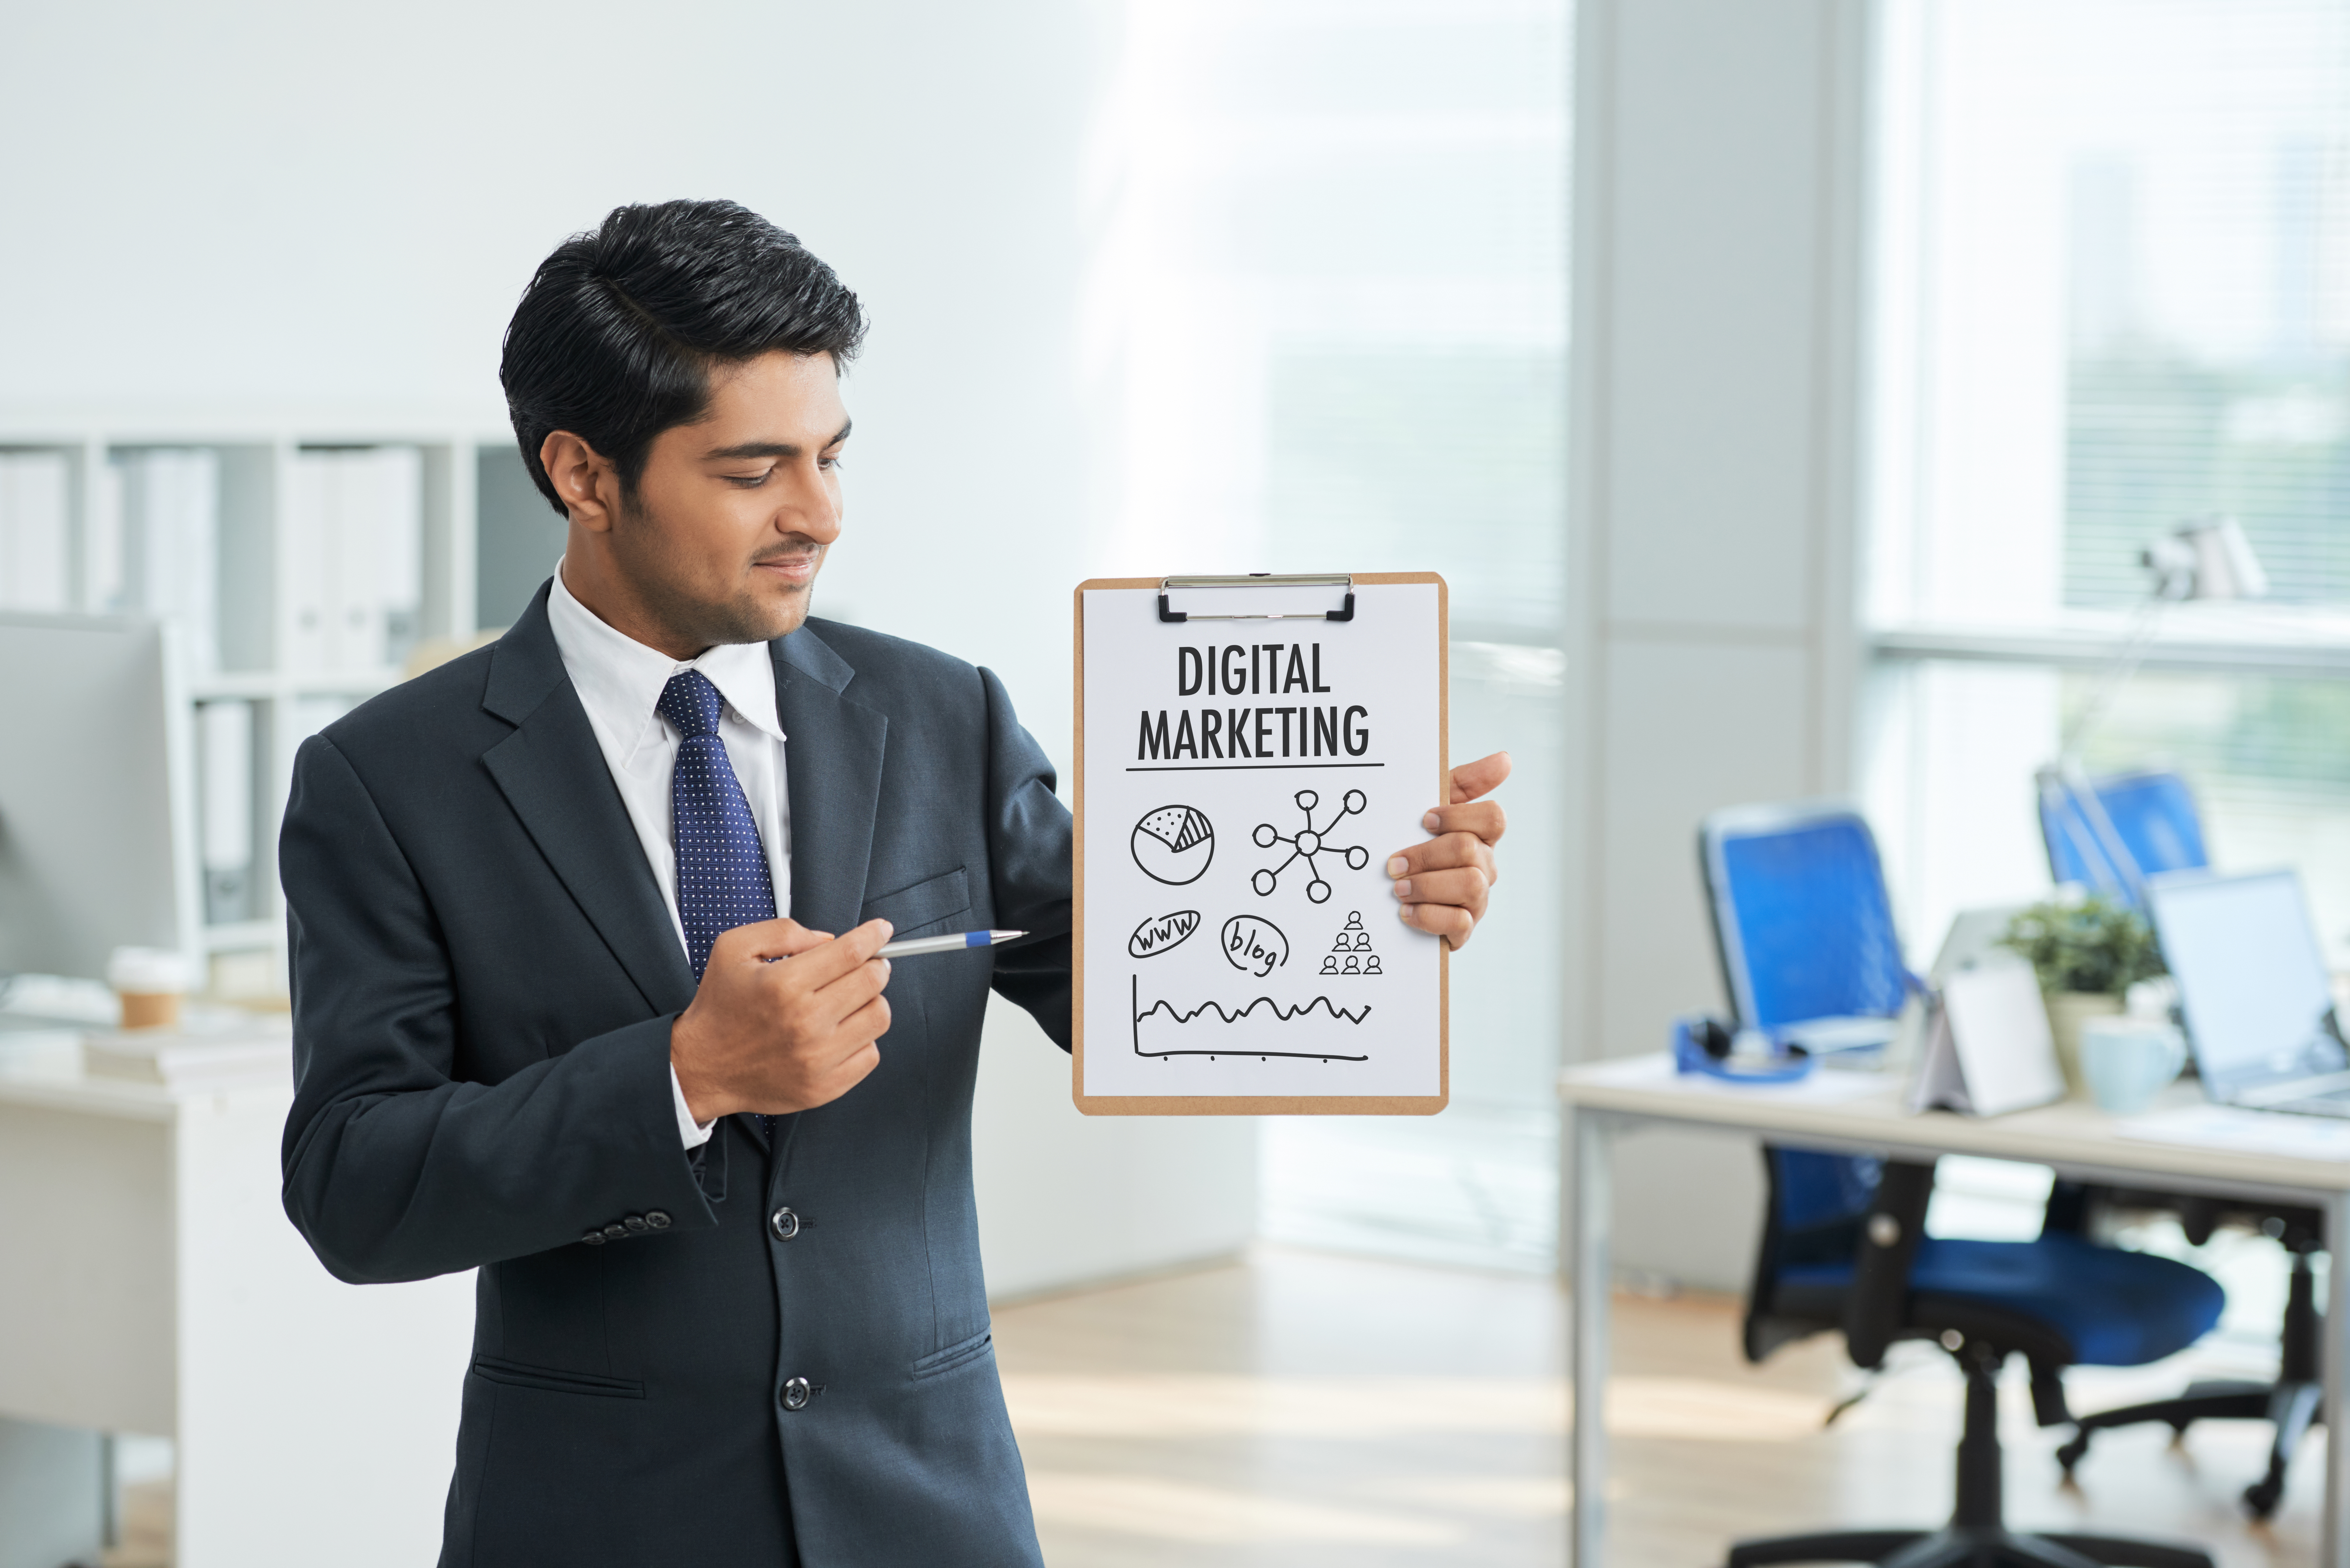 man-suit-standing-office-with-clipboard-pointing-poster-with-words